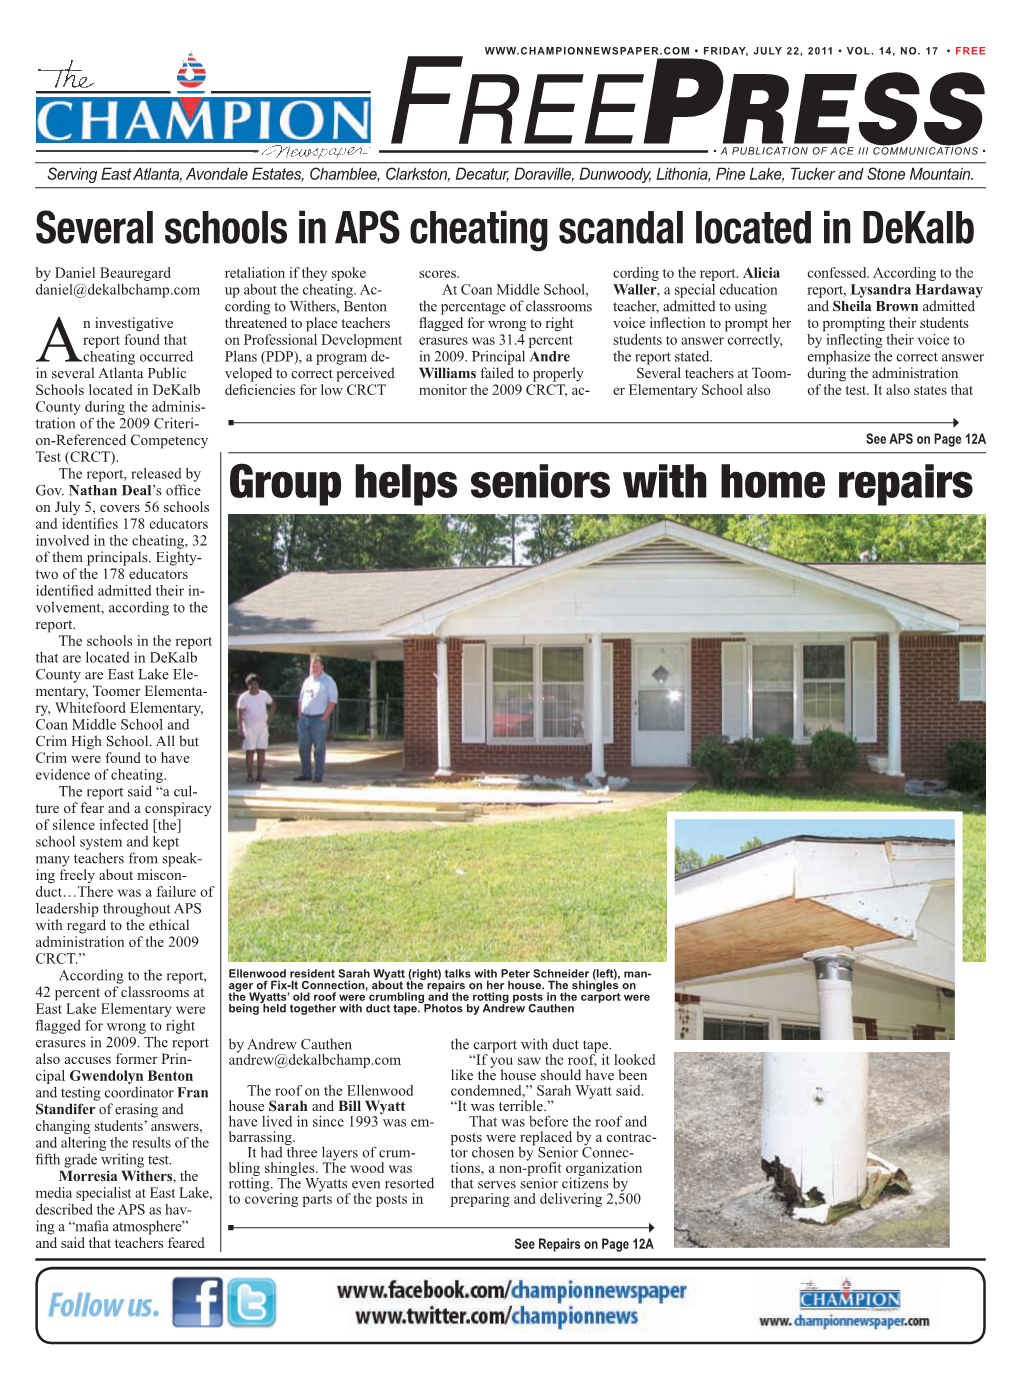 Group Helps Seniors with Home Repairs on July 5, Covers 56 Schools and Identifi Es 178 Educators Involved in the Cheating, 32 of Them Principals